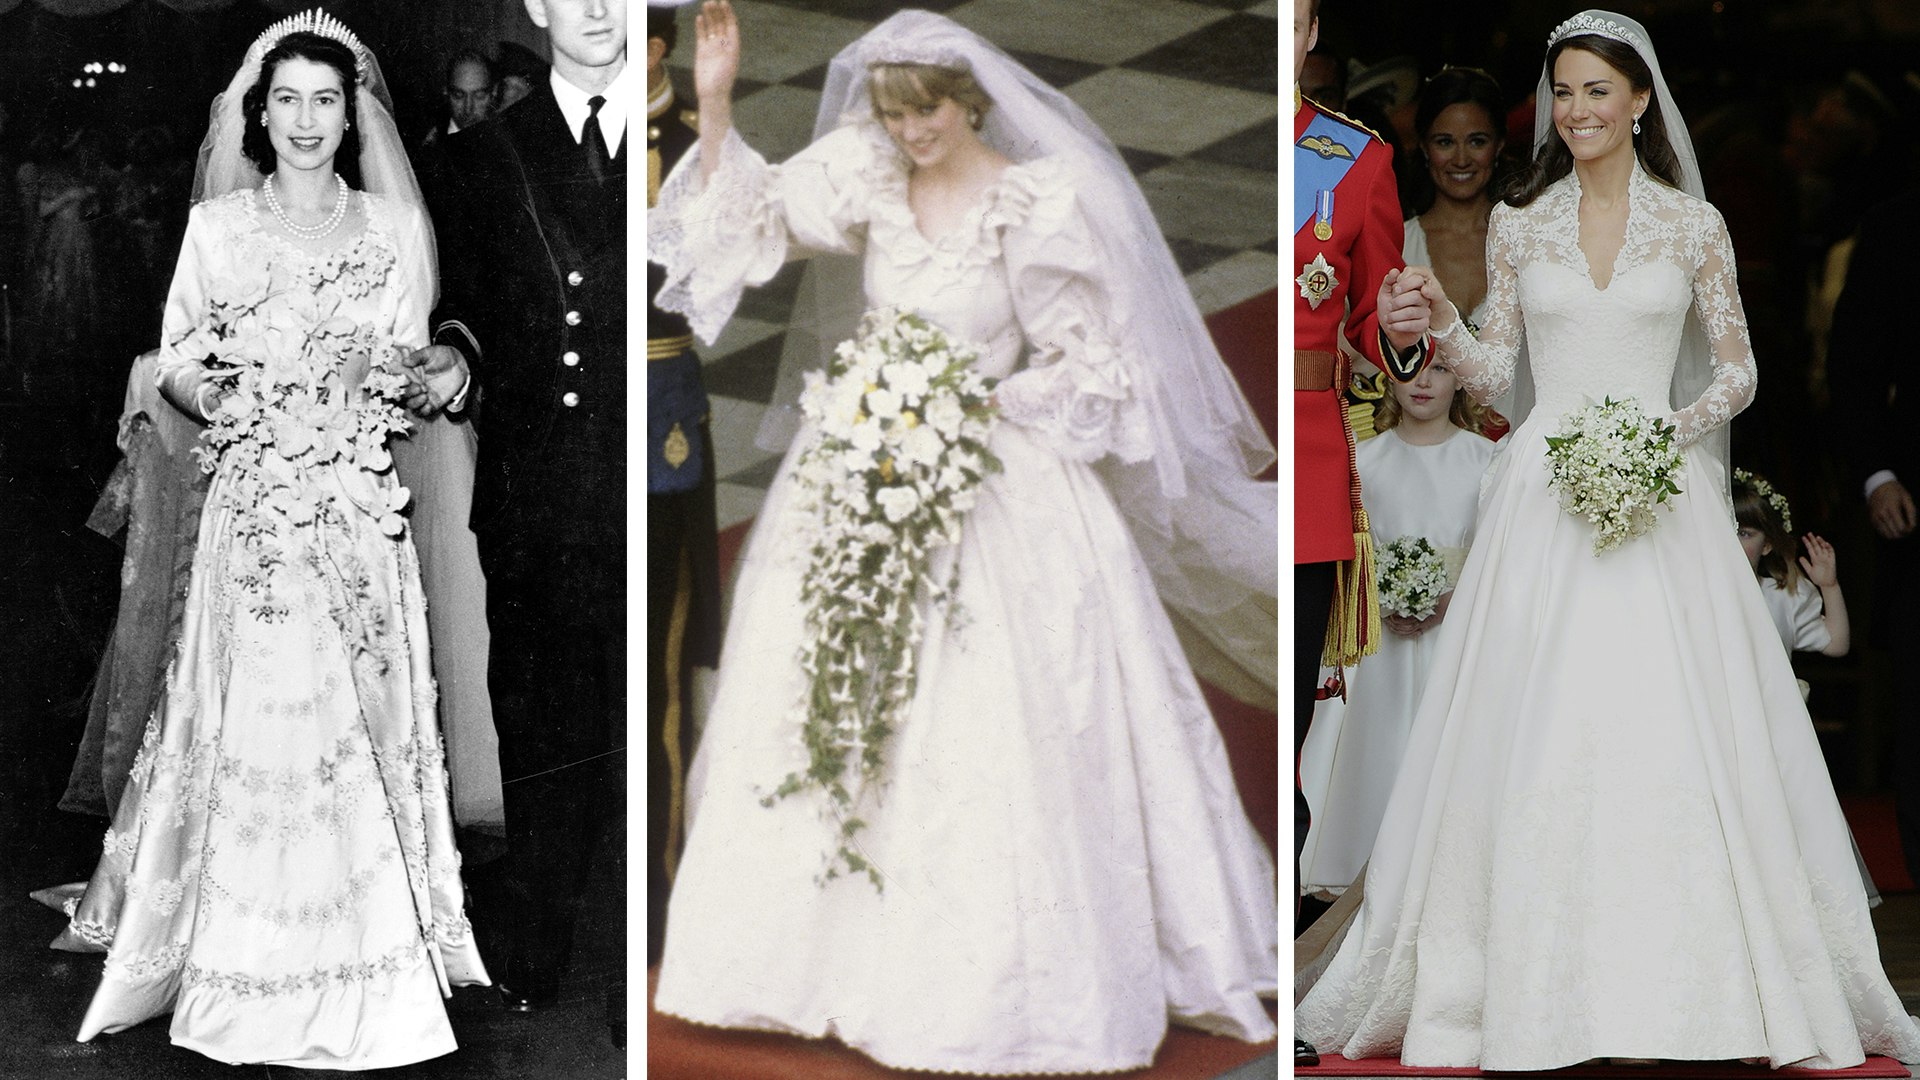 Do You Know That 8 of the World's Most Expensive Wedding Dresses